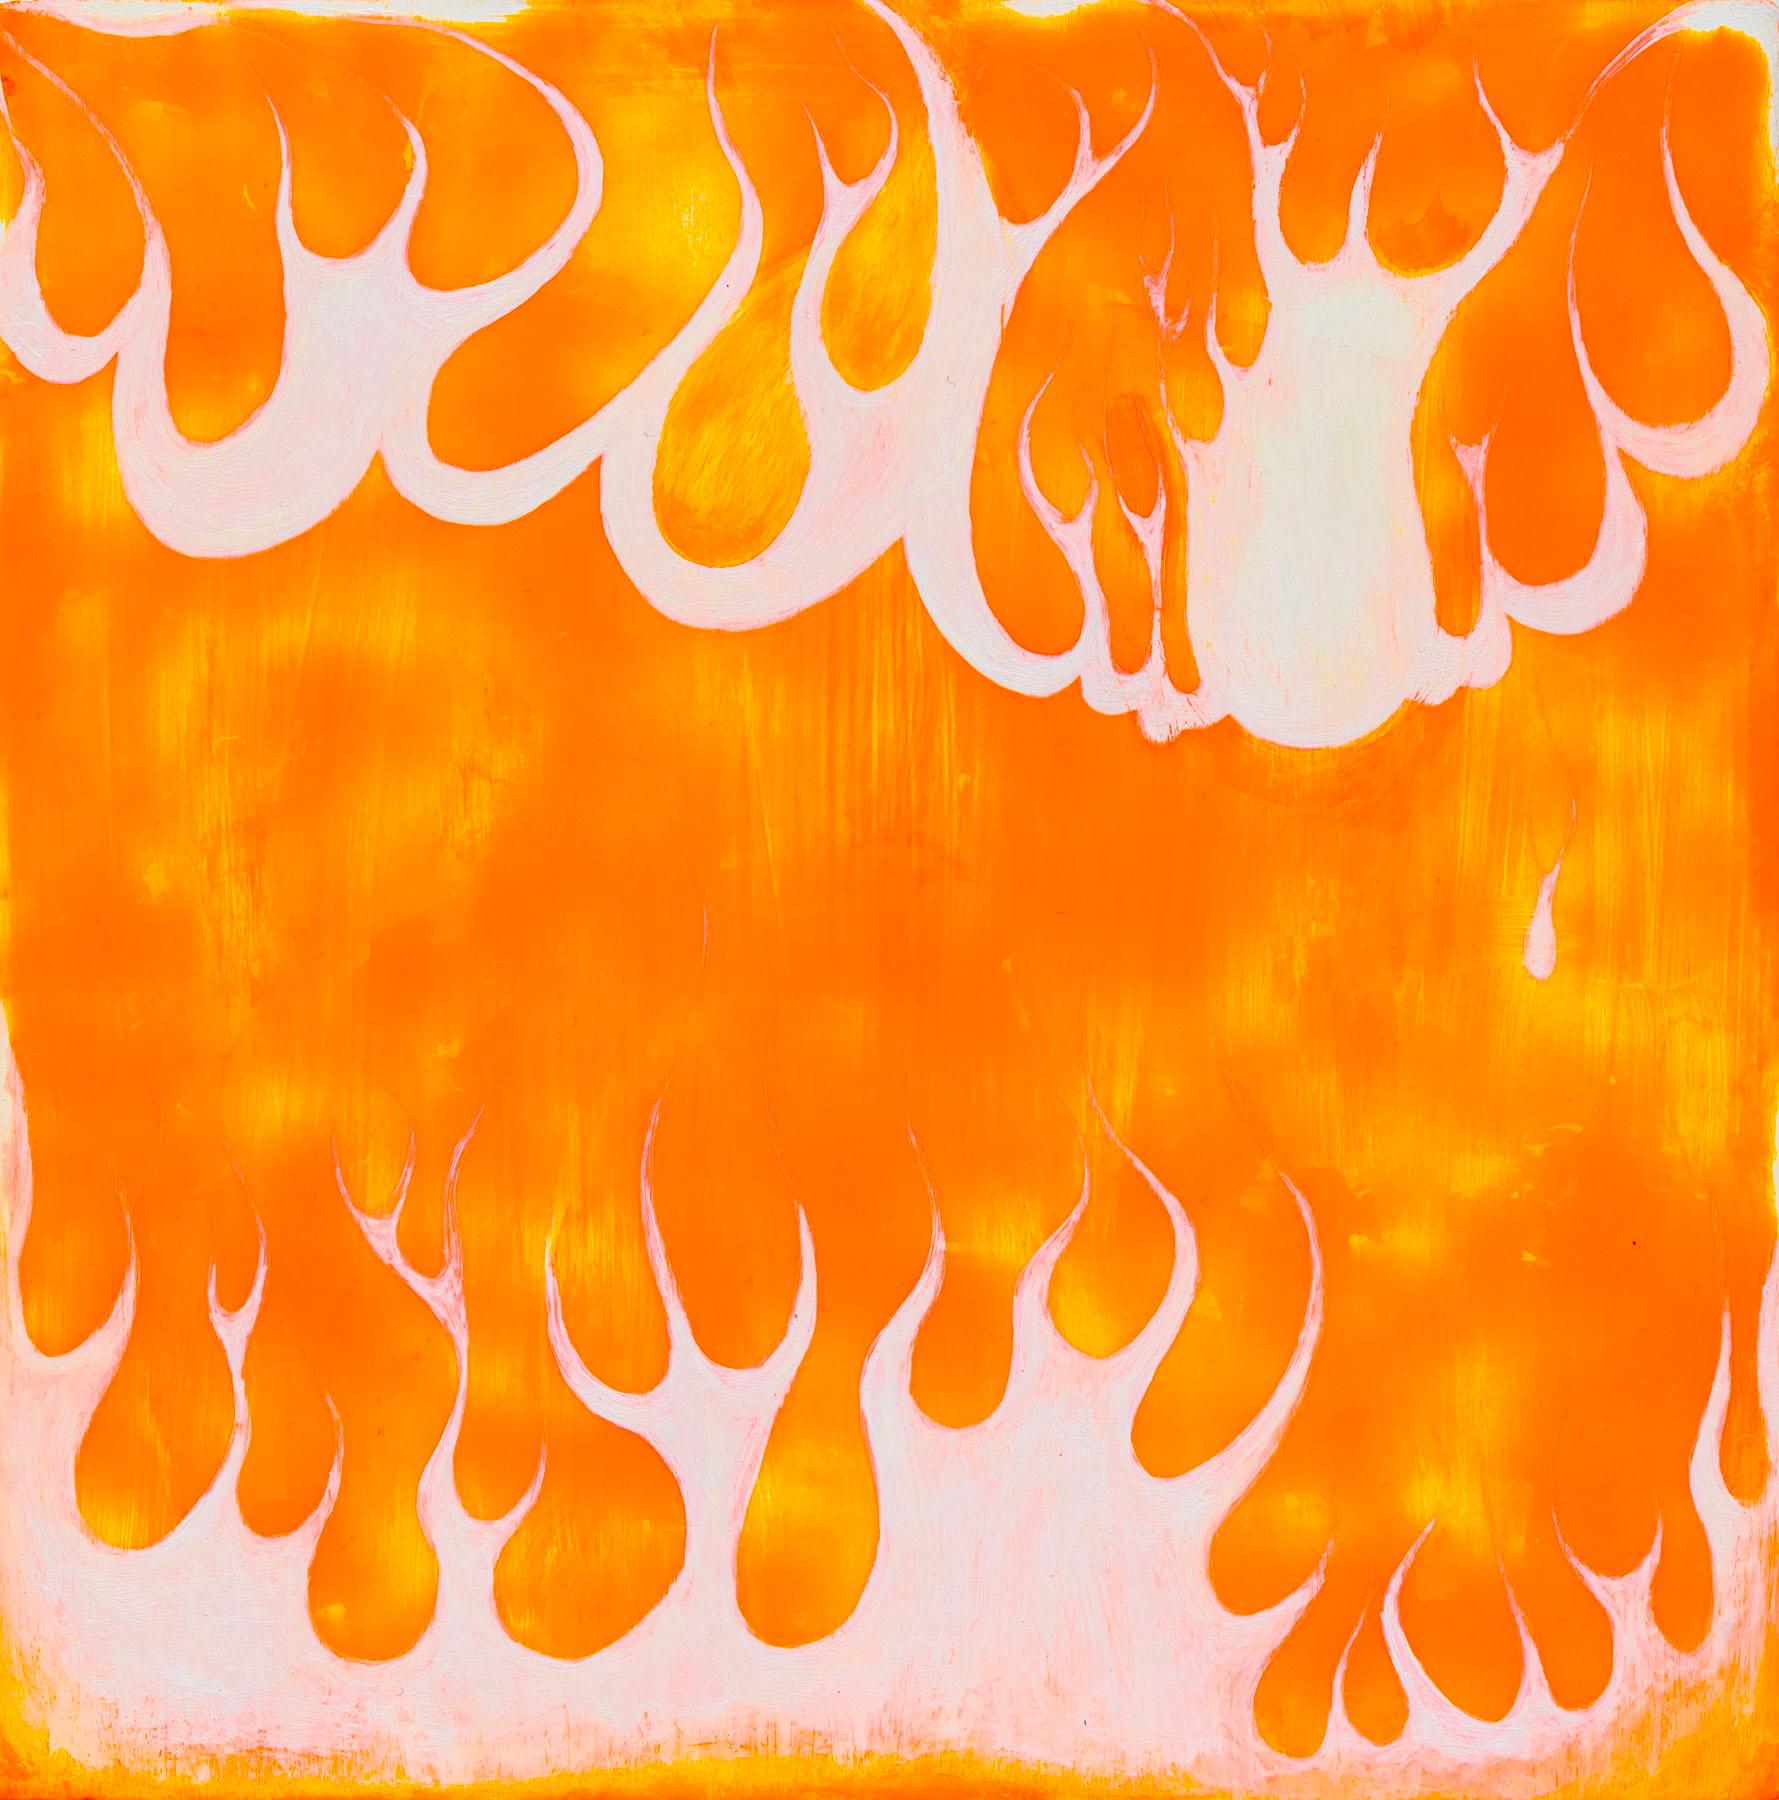 Jim Denney Figurative Painting - Fire Lines, orange and white abstracted flames, painting on wood panel